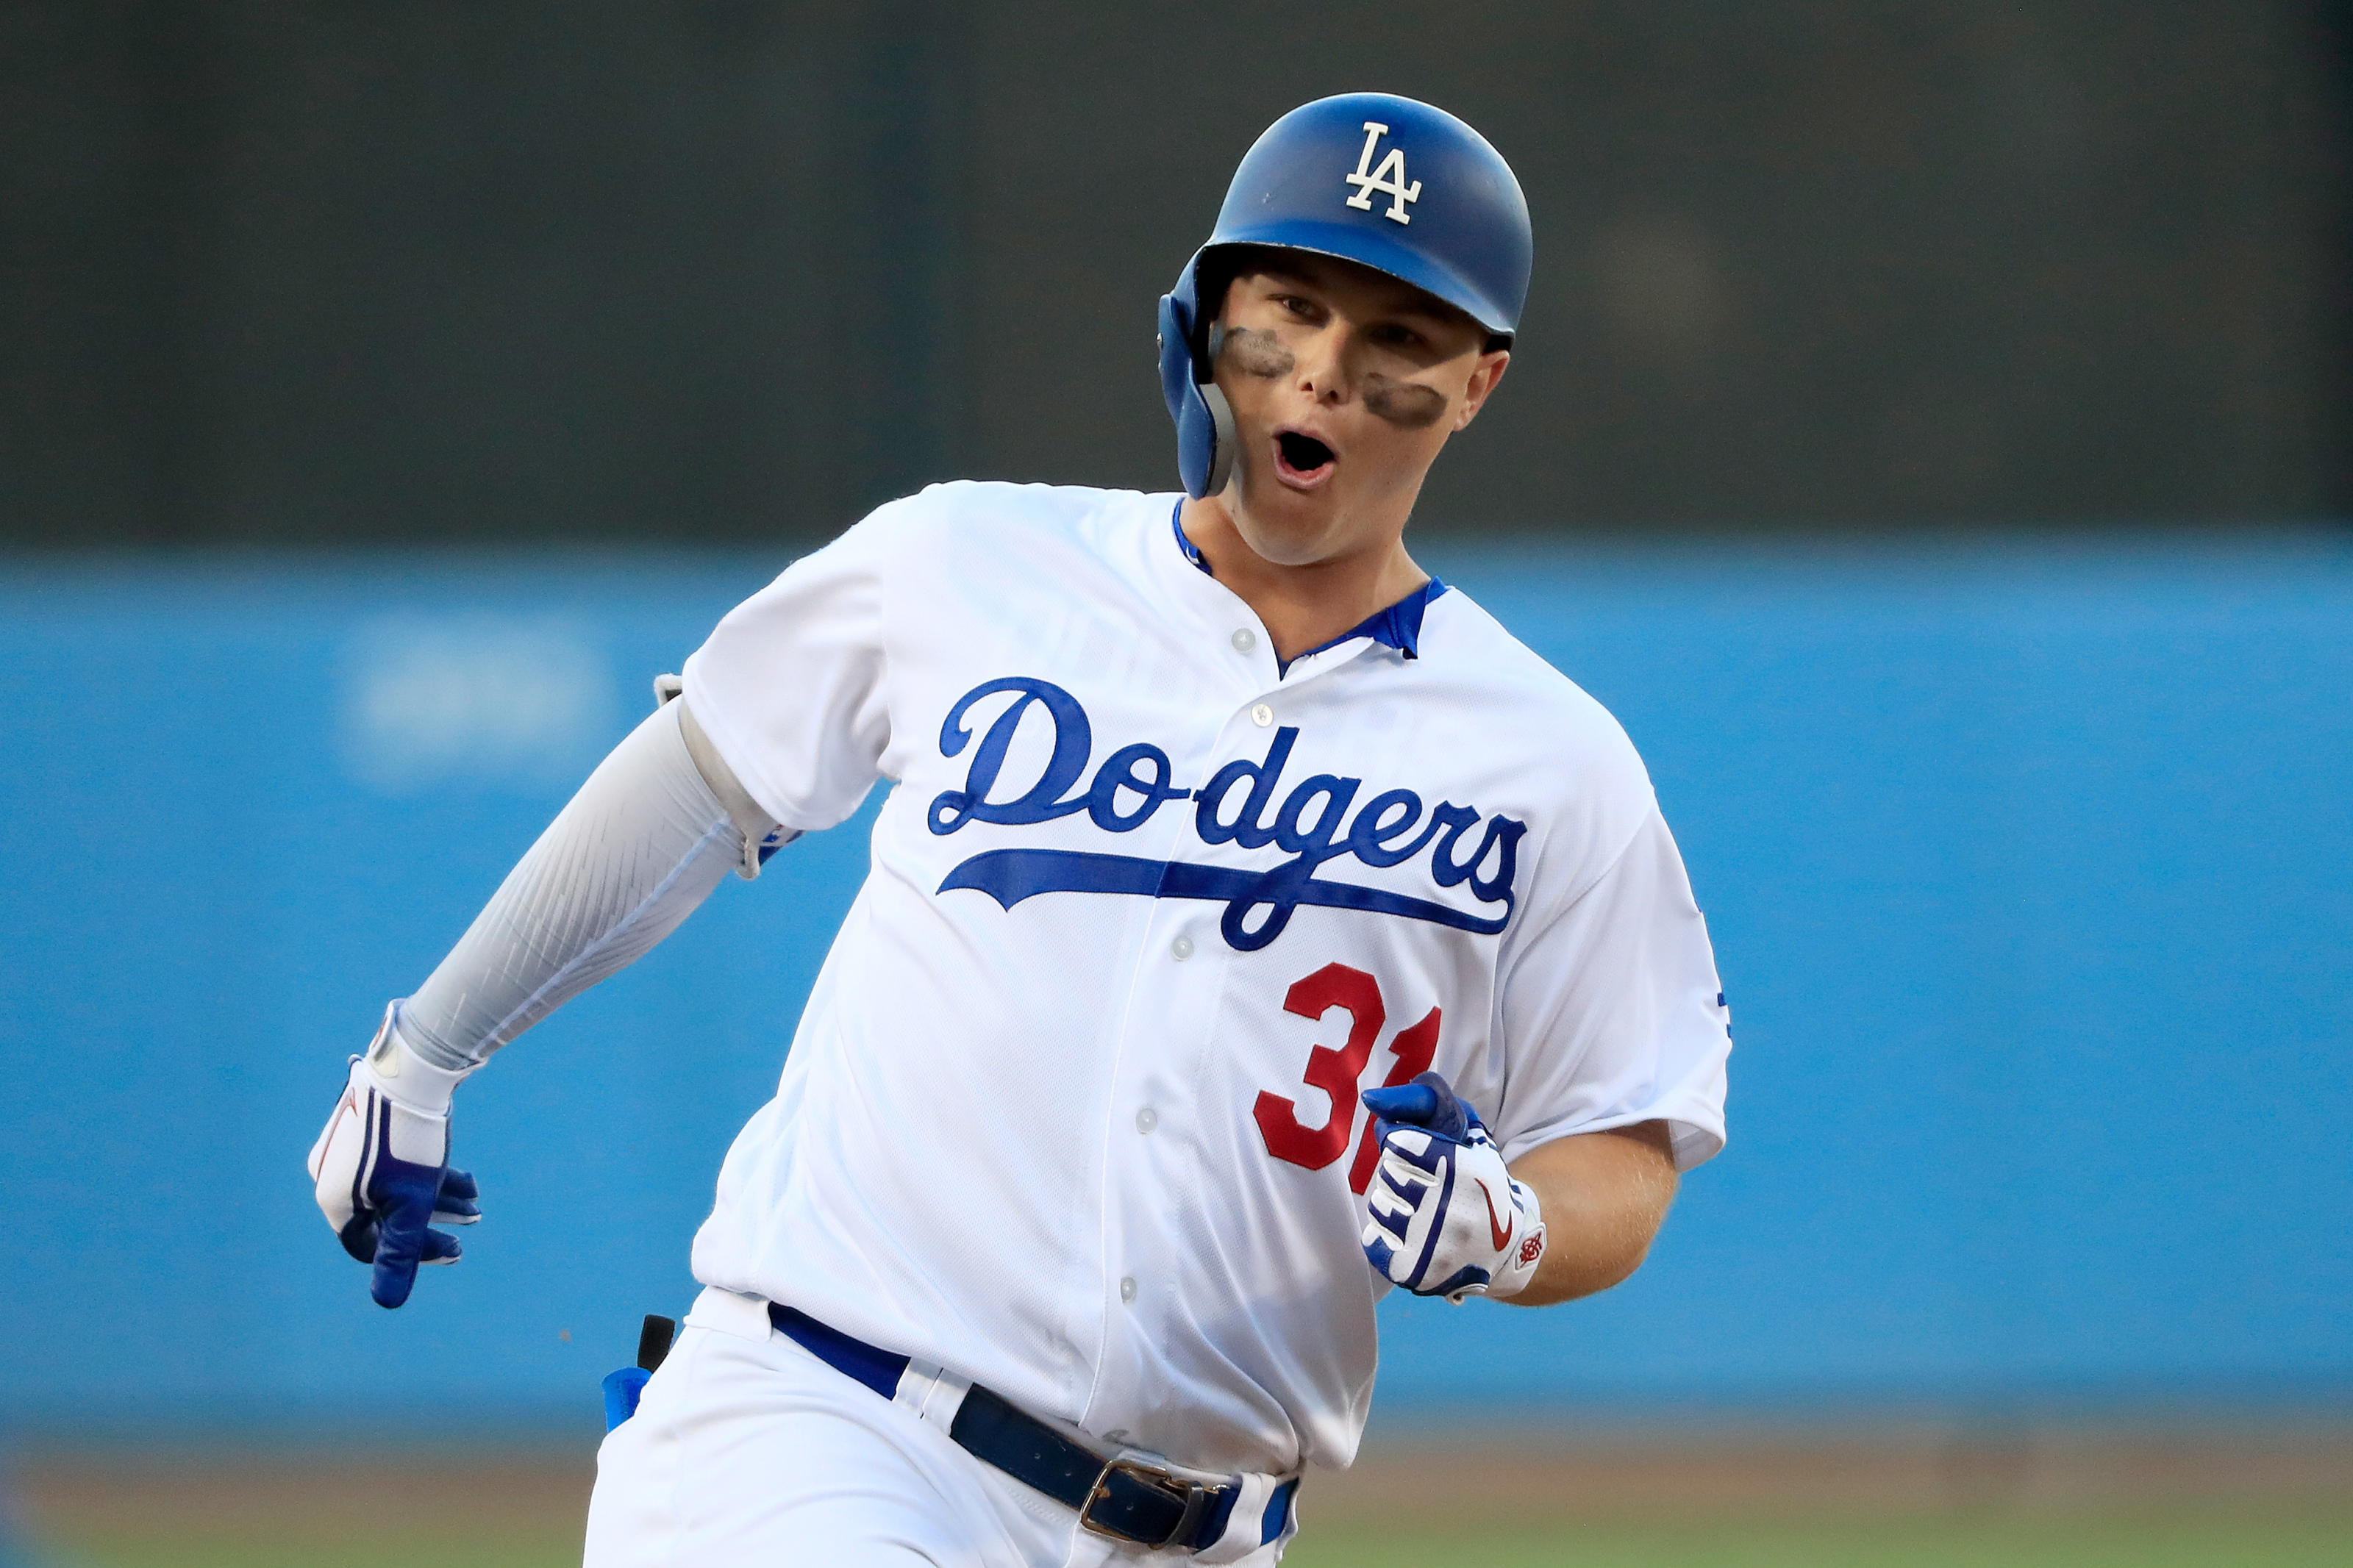 Los Angeles Dodgers are due for back-to-back big nights and a sweep